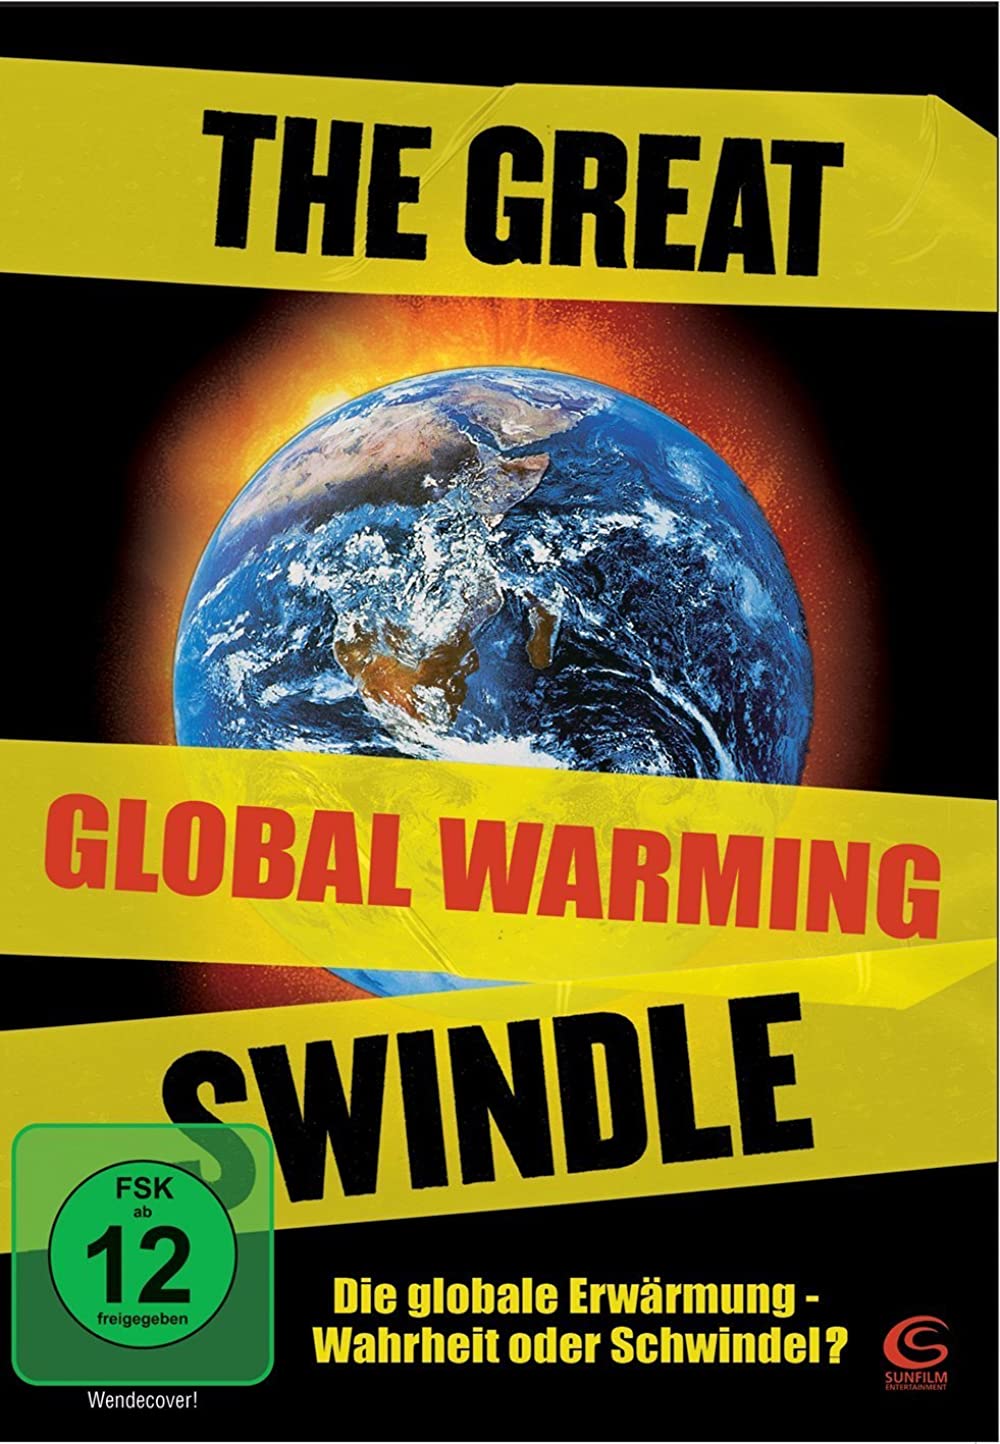 The Great Global Warming Swindle Movie Download - The Great Global Warming Swindle Movie Online